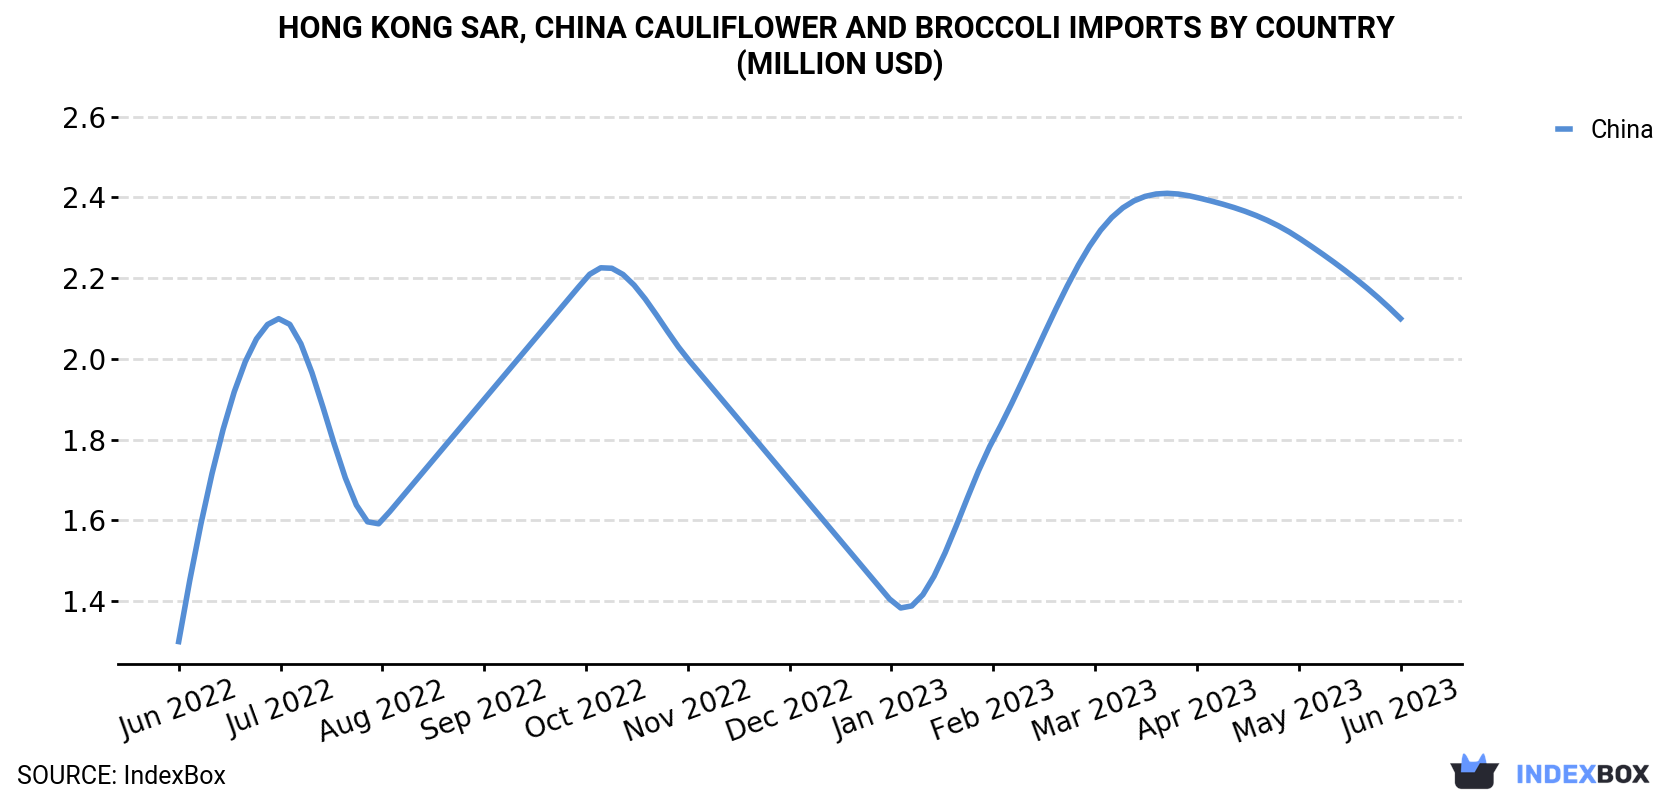 Hong Kong Cauliflower And Broccoli Imports By Country (Million USD)